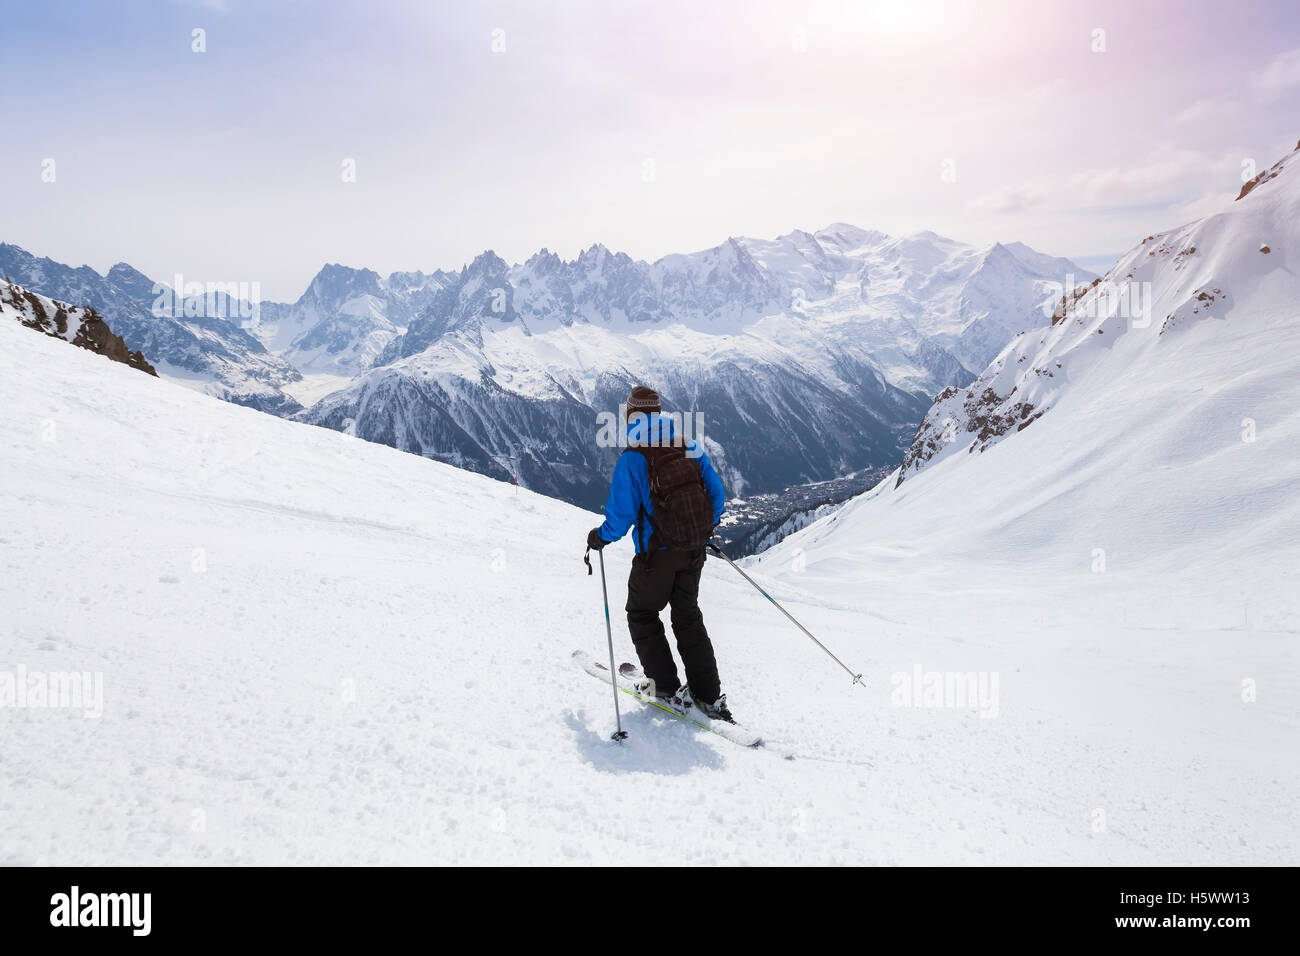 Skier skiing on red slope in Alps mountains near Chamonix, France Stock Photo